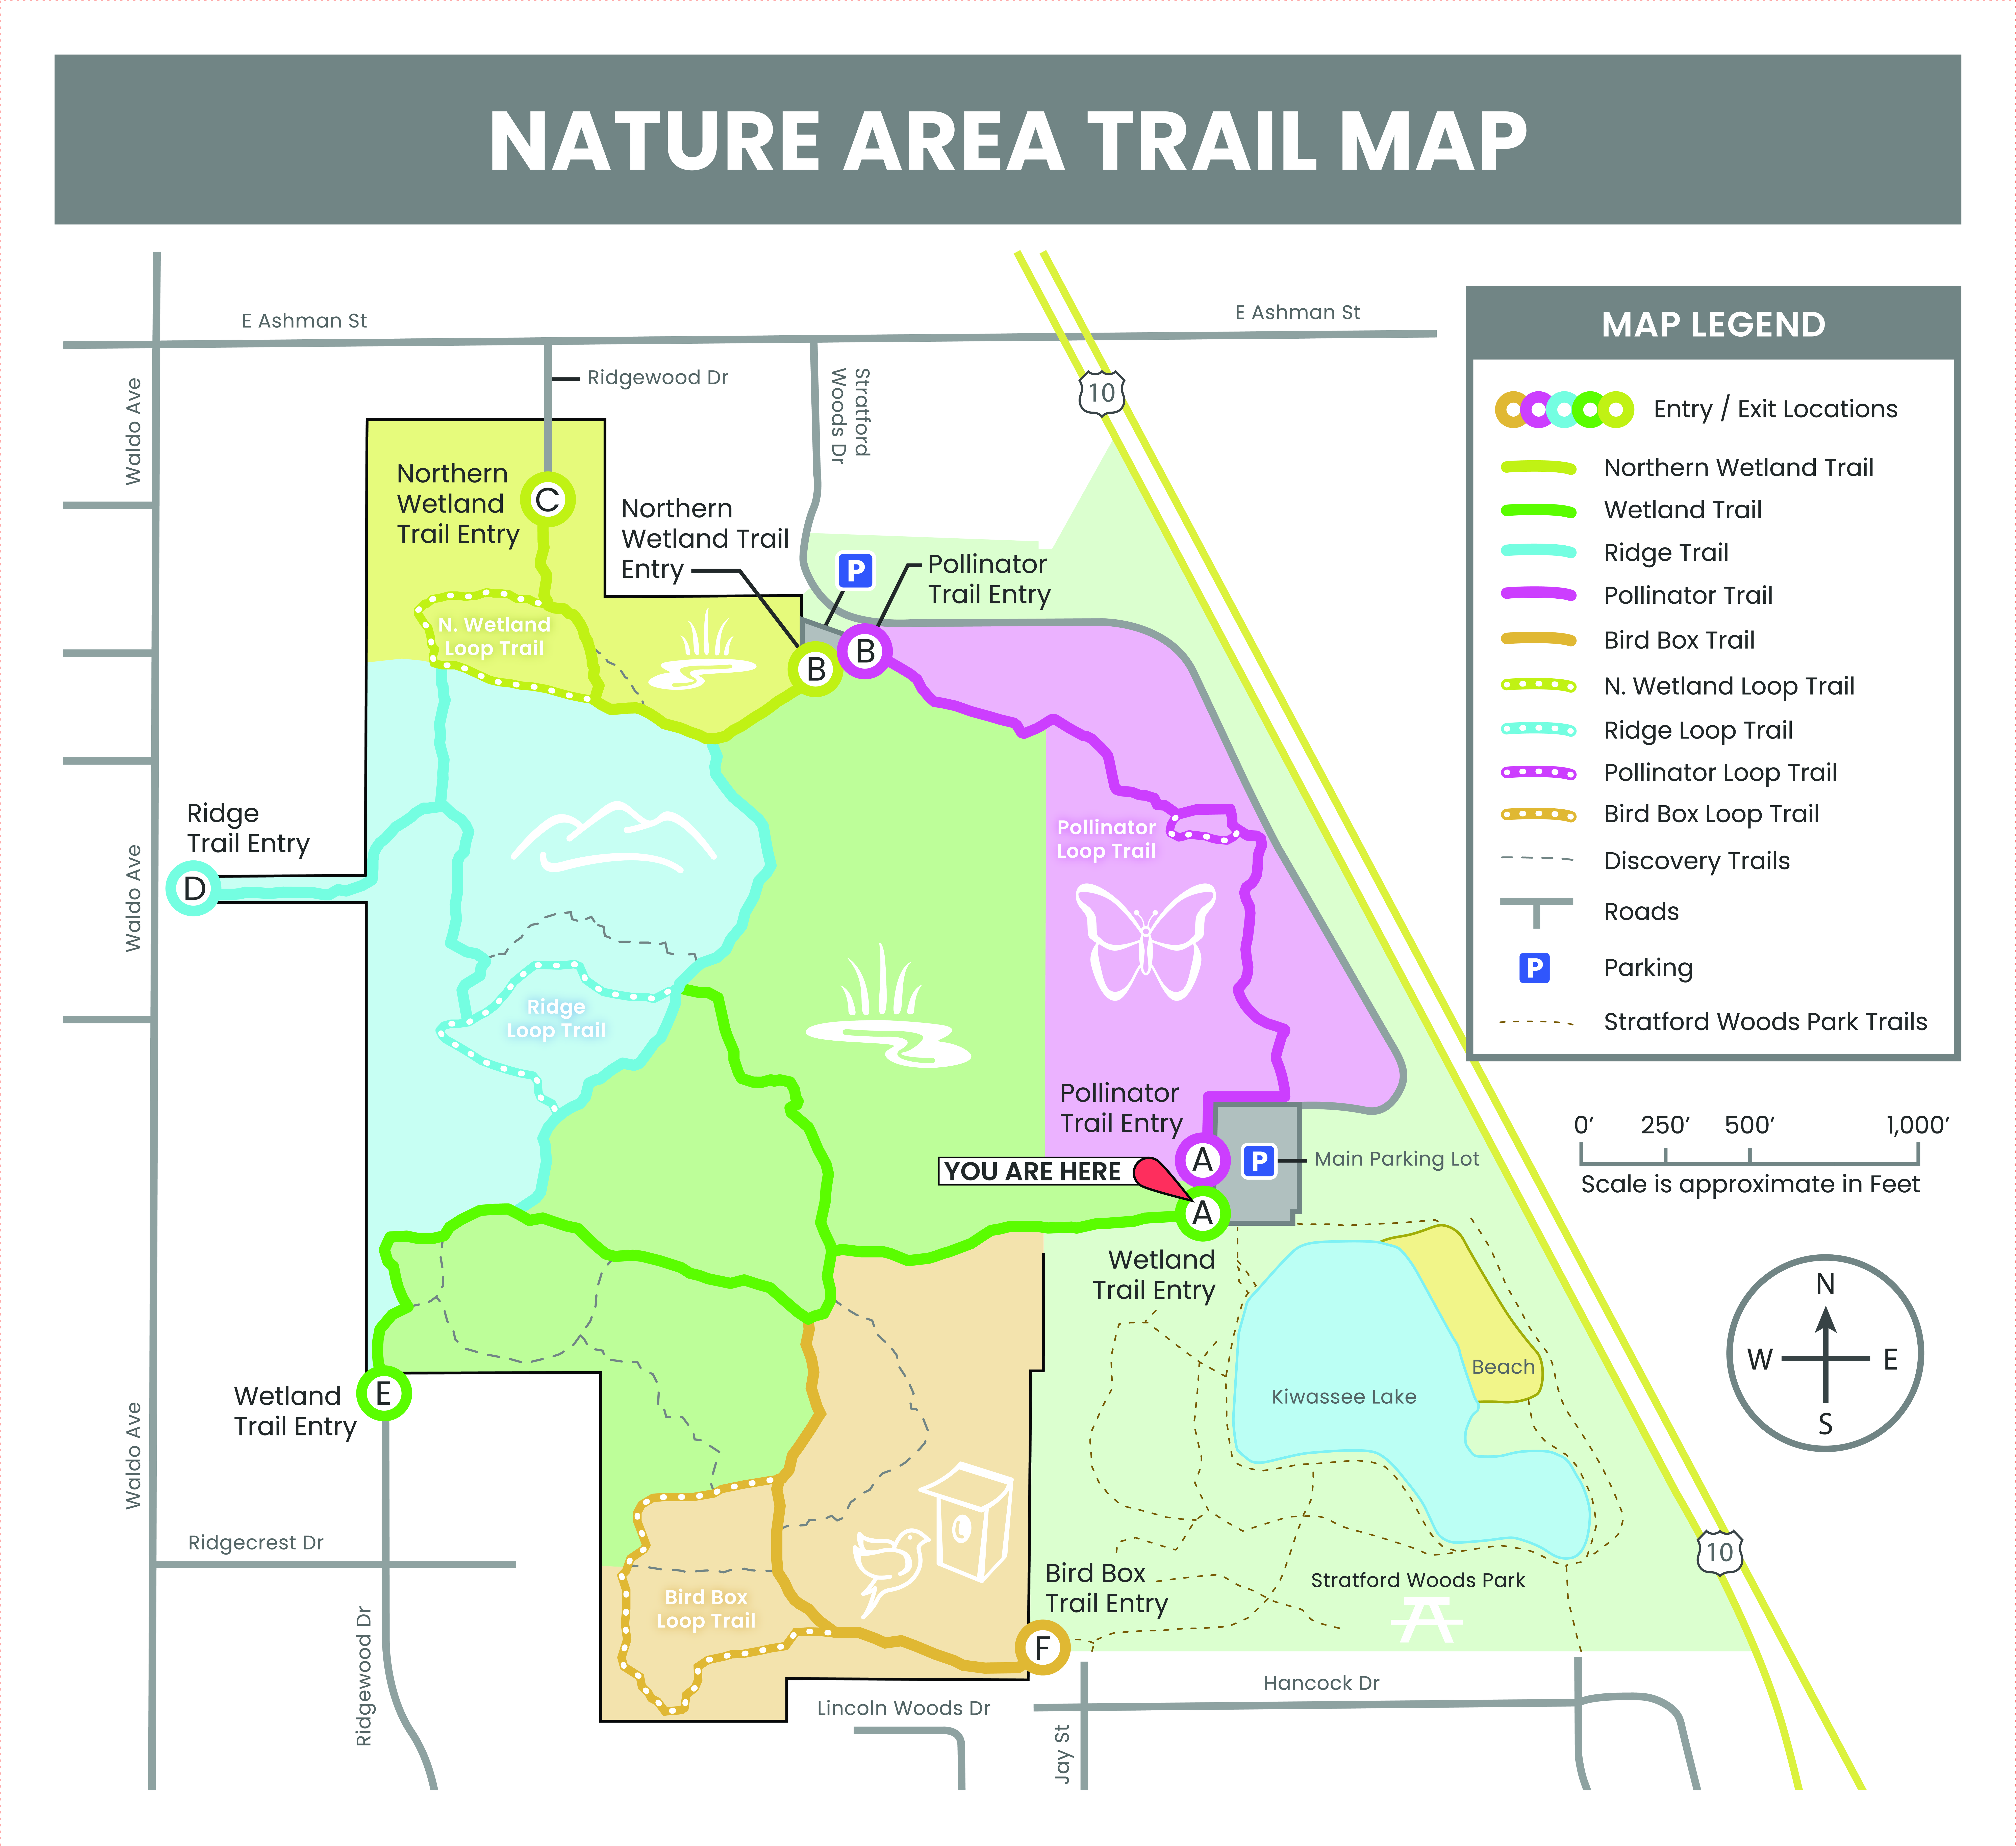 Eagle Ridge Nature Area Trail Map shows trail access from the two parking areas.